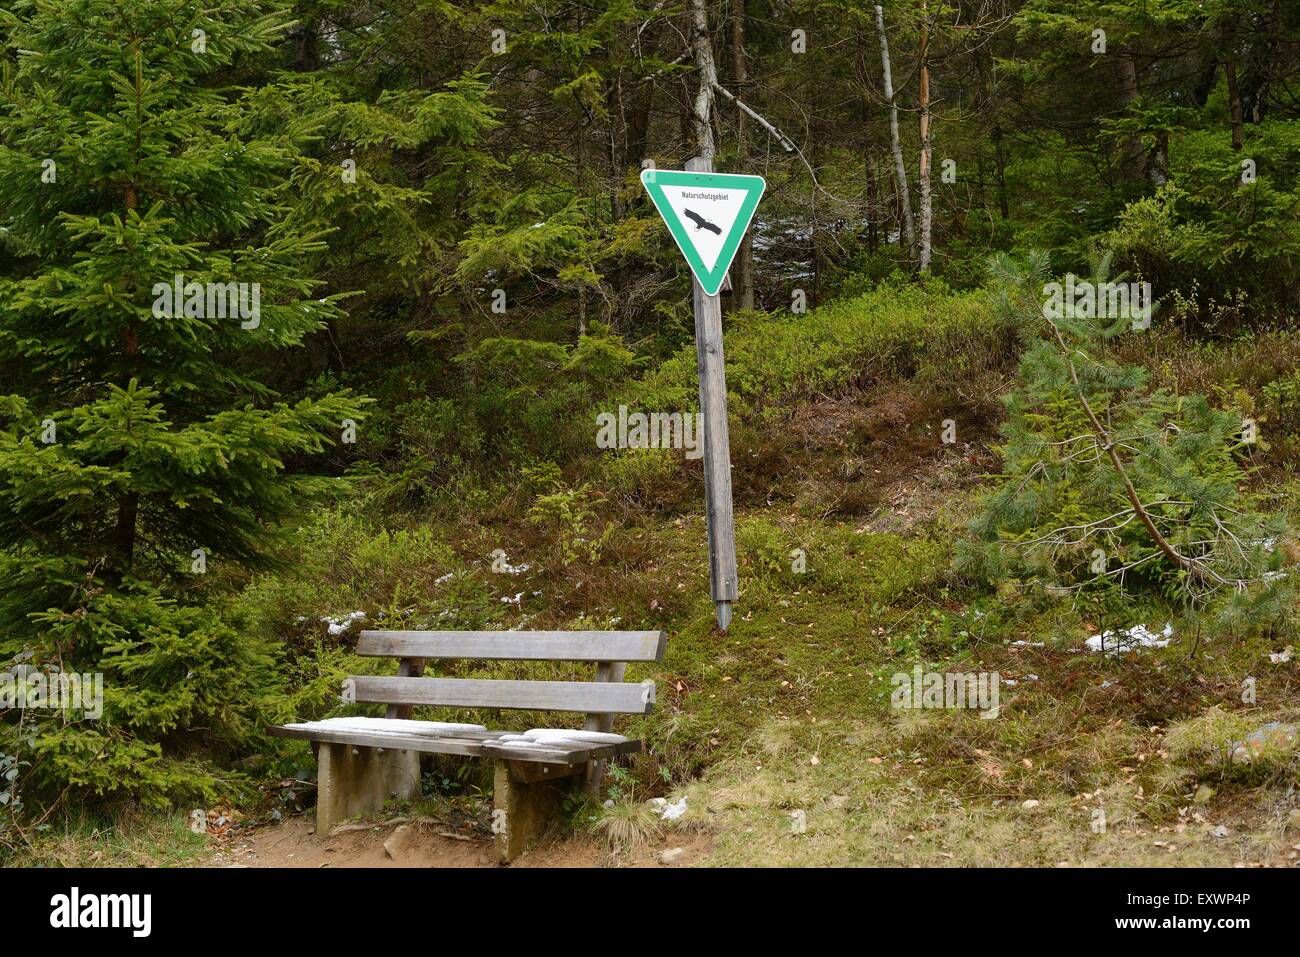 Bench and signin Bavarian Forest National Park, Germany Stock Photo